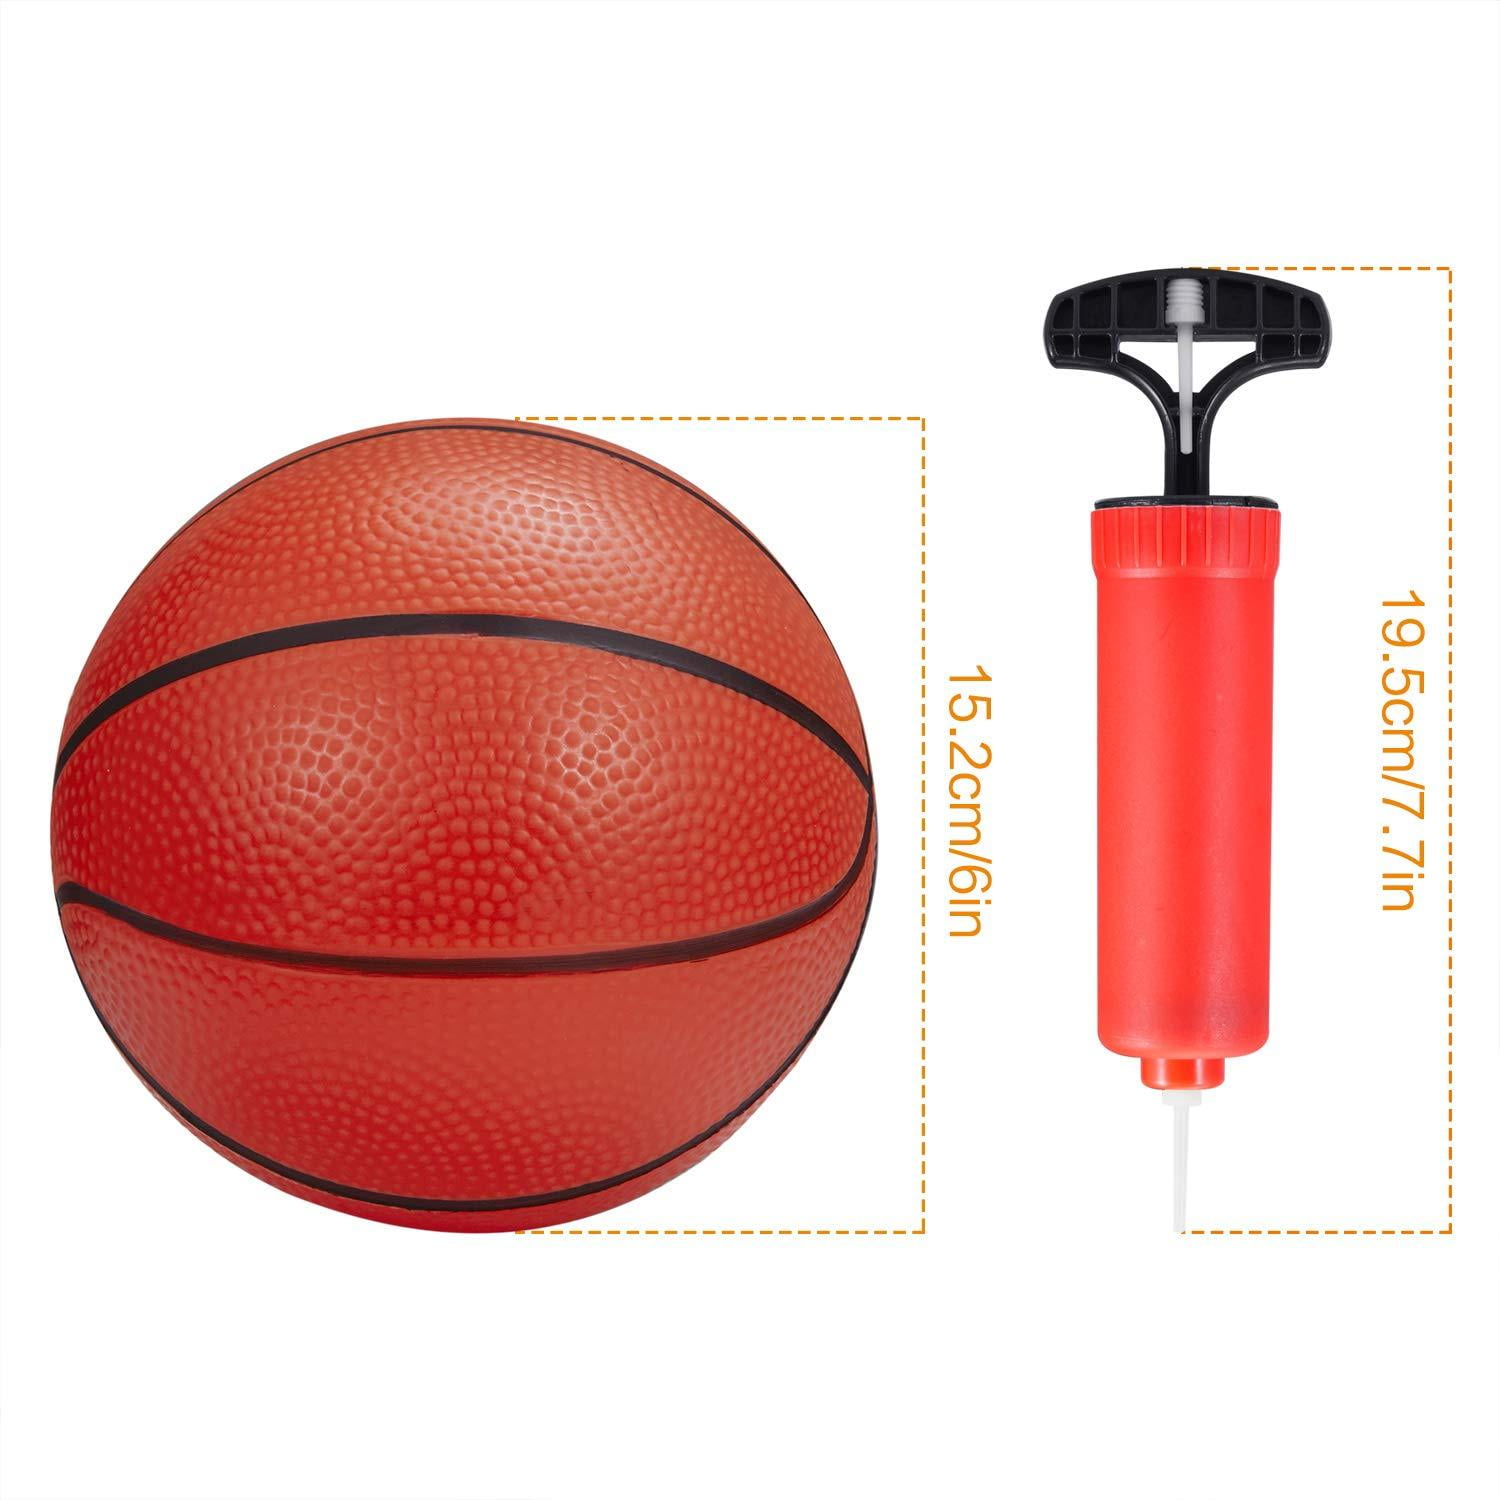 BESTTY 6 Inches Colorful Toddler Kids Replacement Mini Toy Basketball Rubber Baketball for Kids 5 PCS with 1 Air Pump Teenager Basketballs 